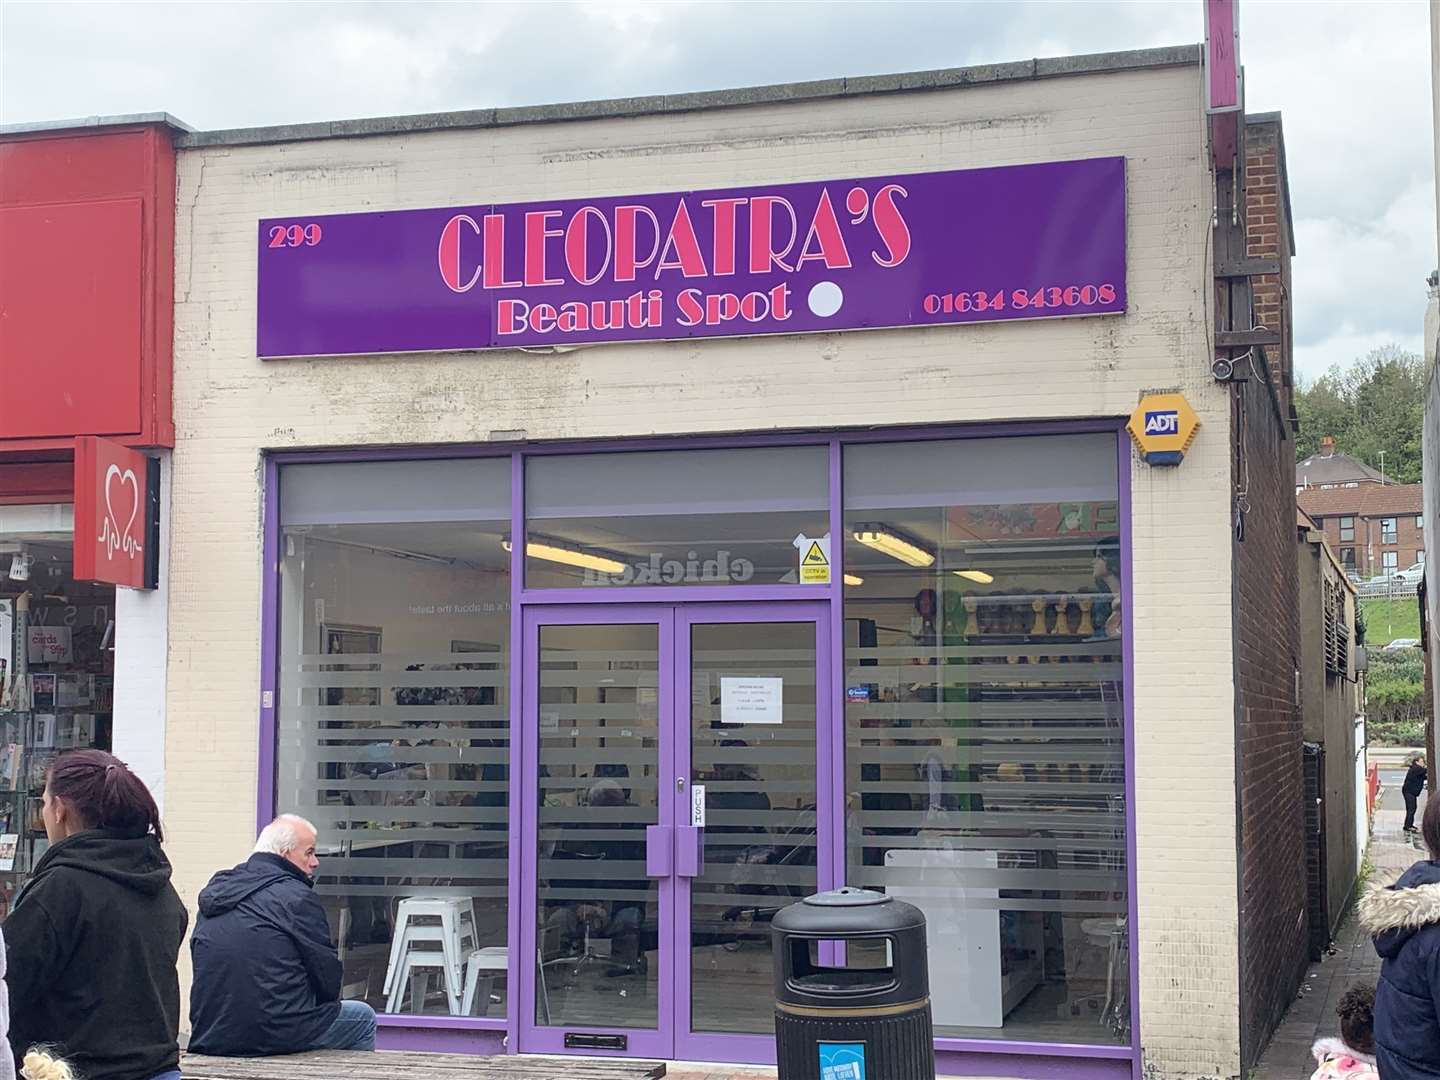 Cleopatras Beauty Stop in Chatham High Street (9202173)